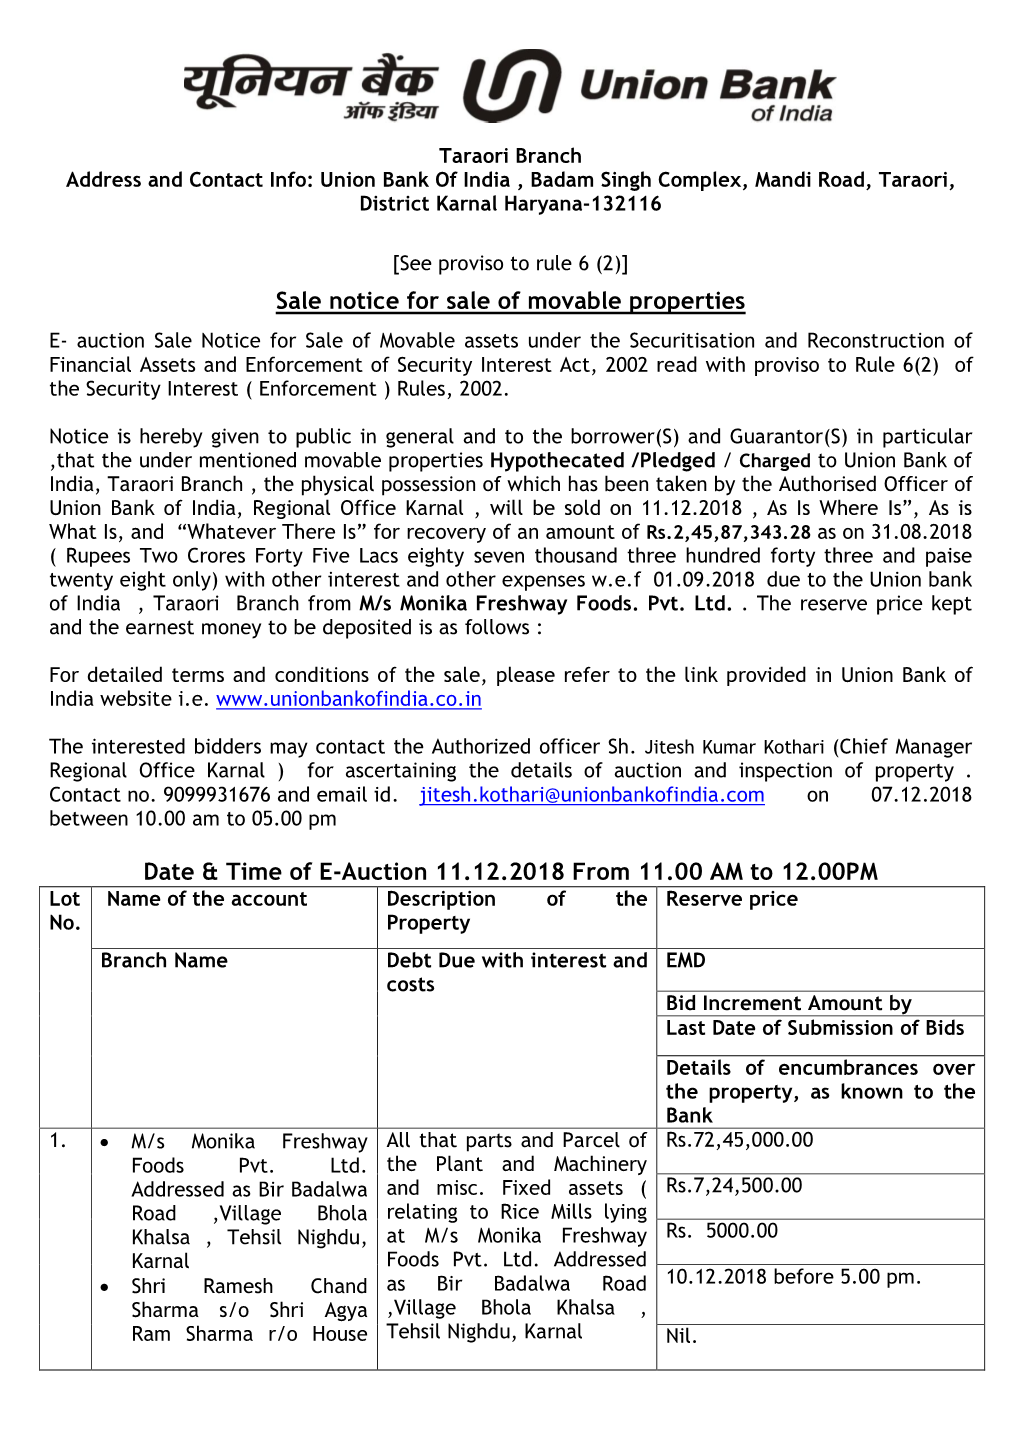 Sale Notice for Sale of Movable Properties Date & Time of E-Auction